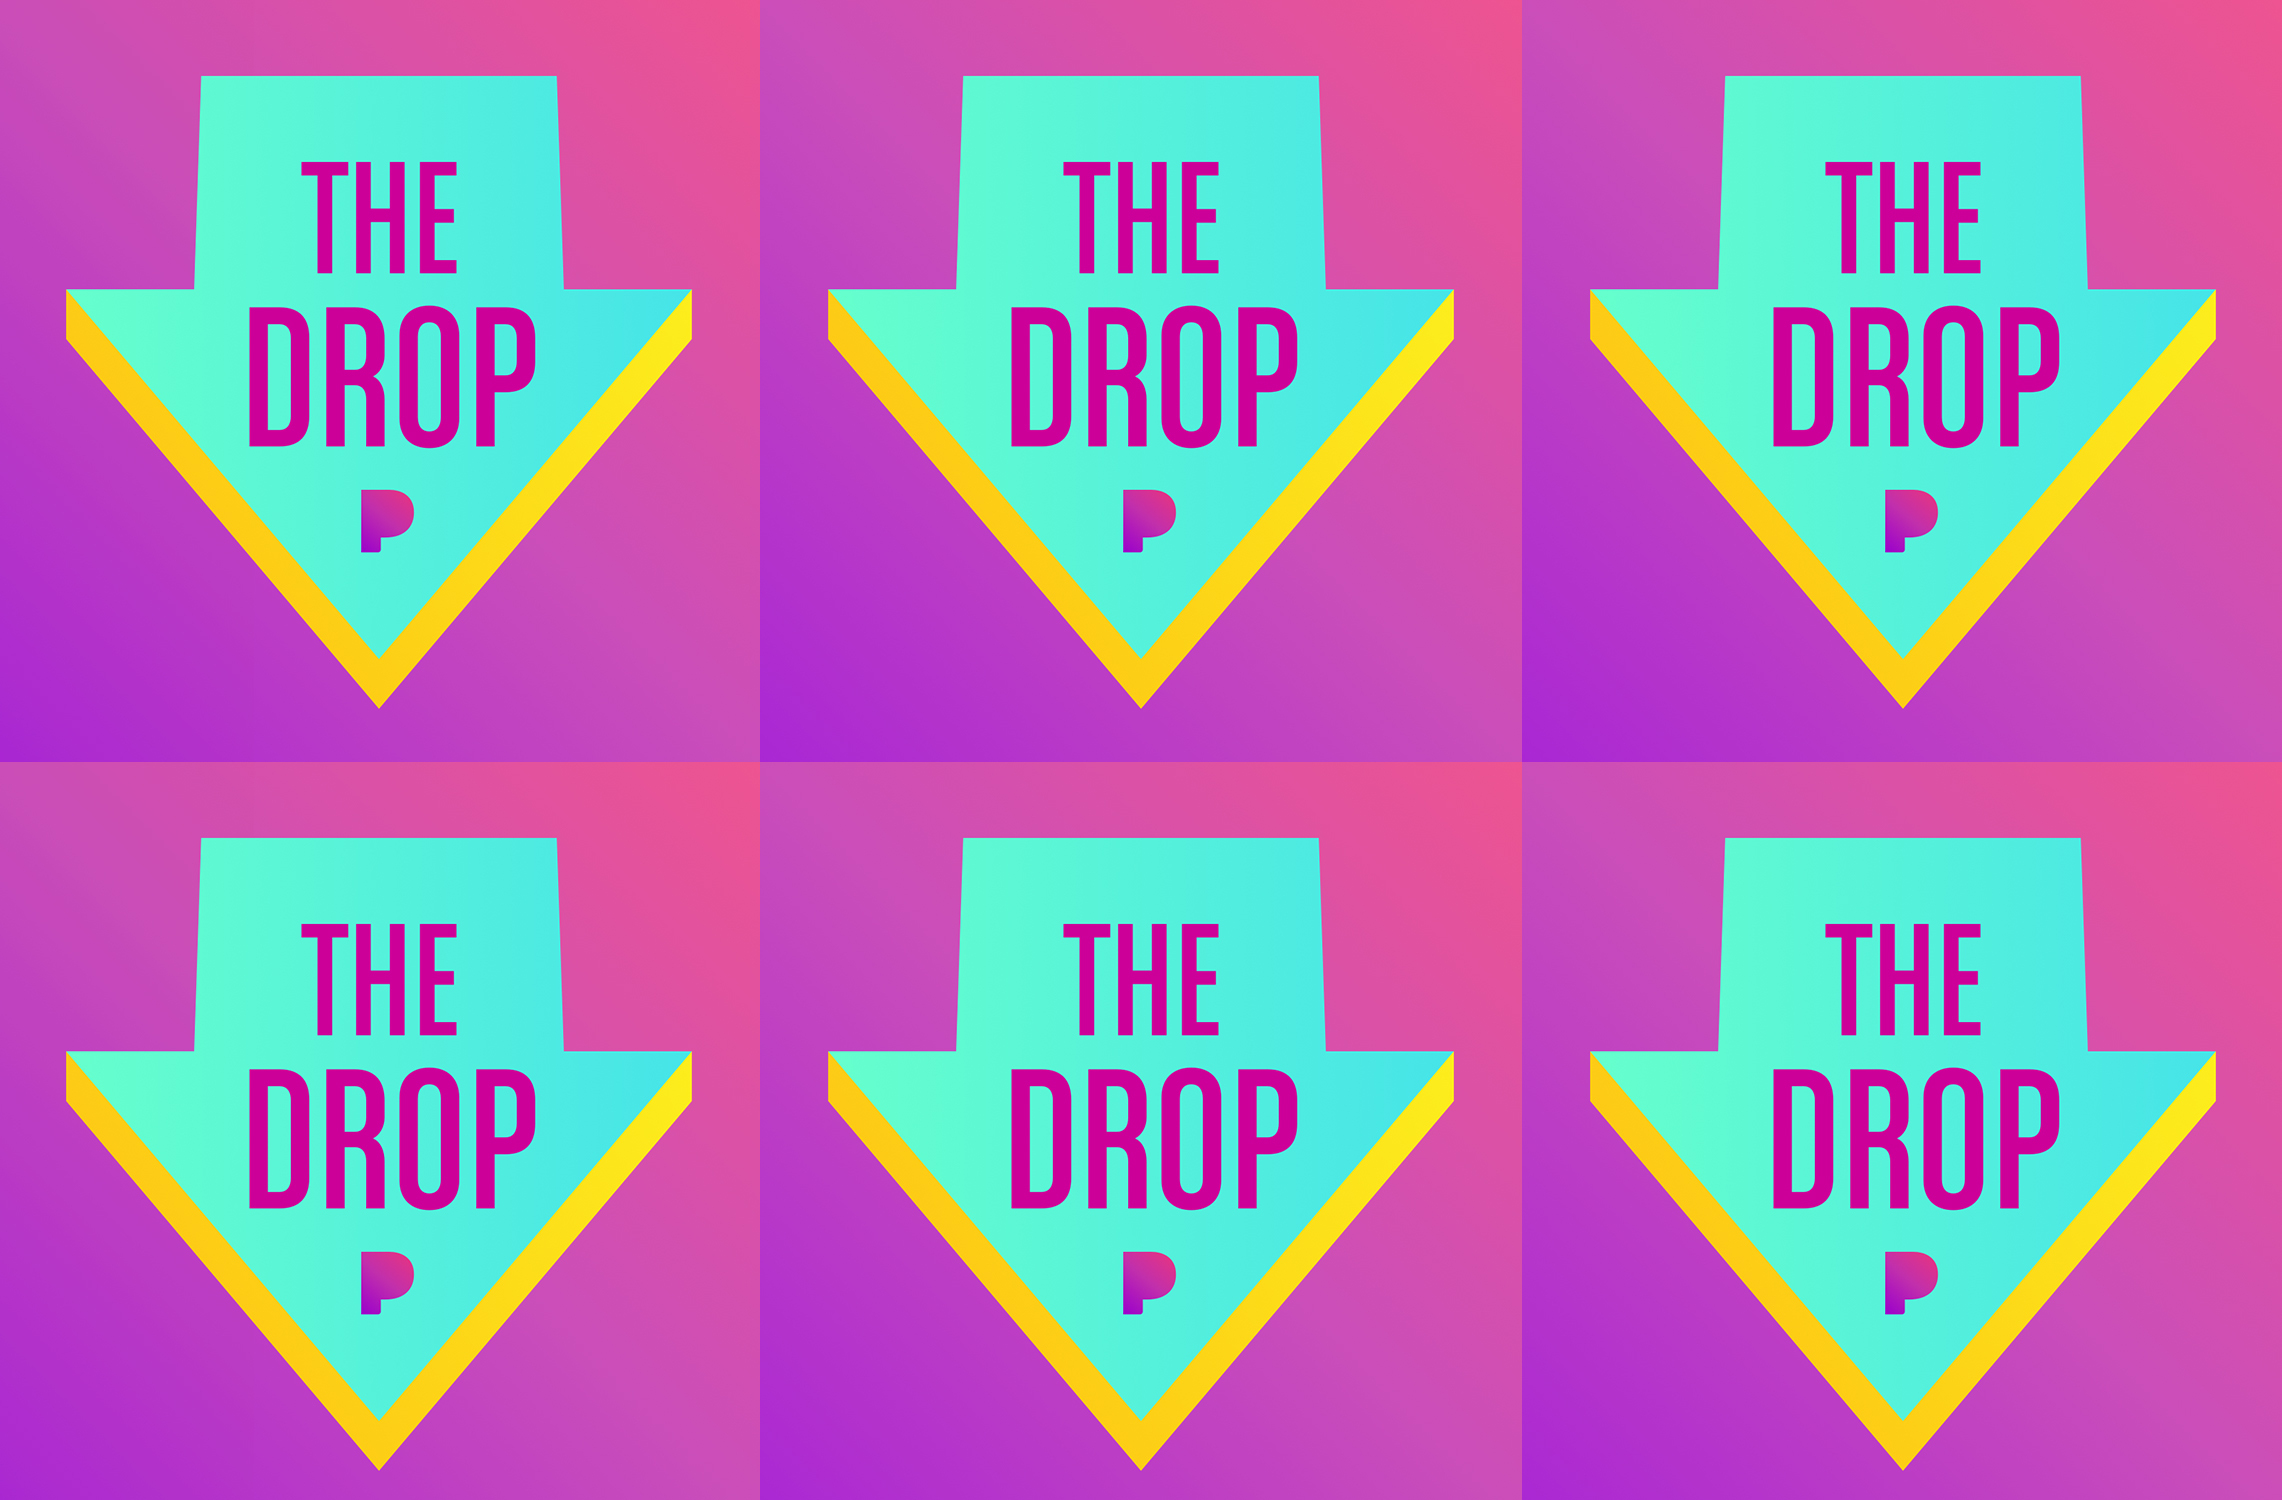 Pandora’s ‘The Drop’ presents you new music every day